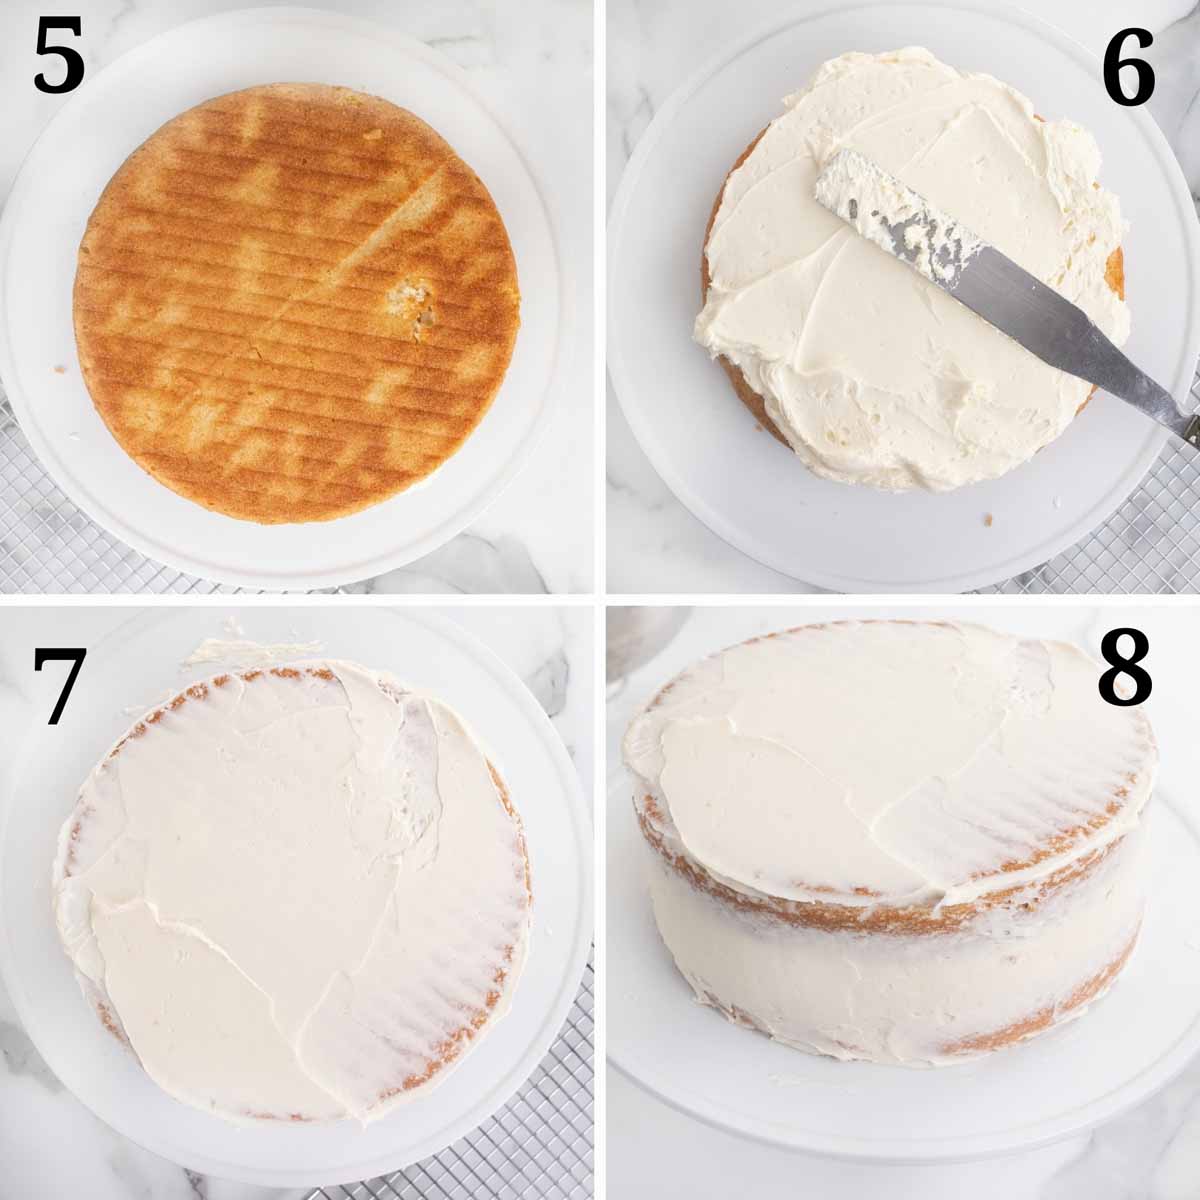 four images showing how to assemble the winter wonderland cake